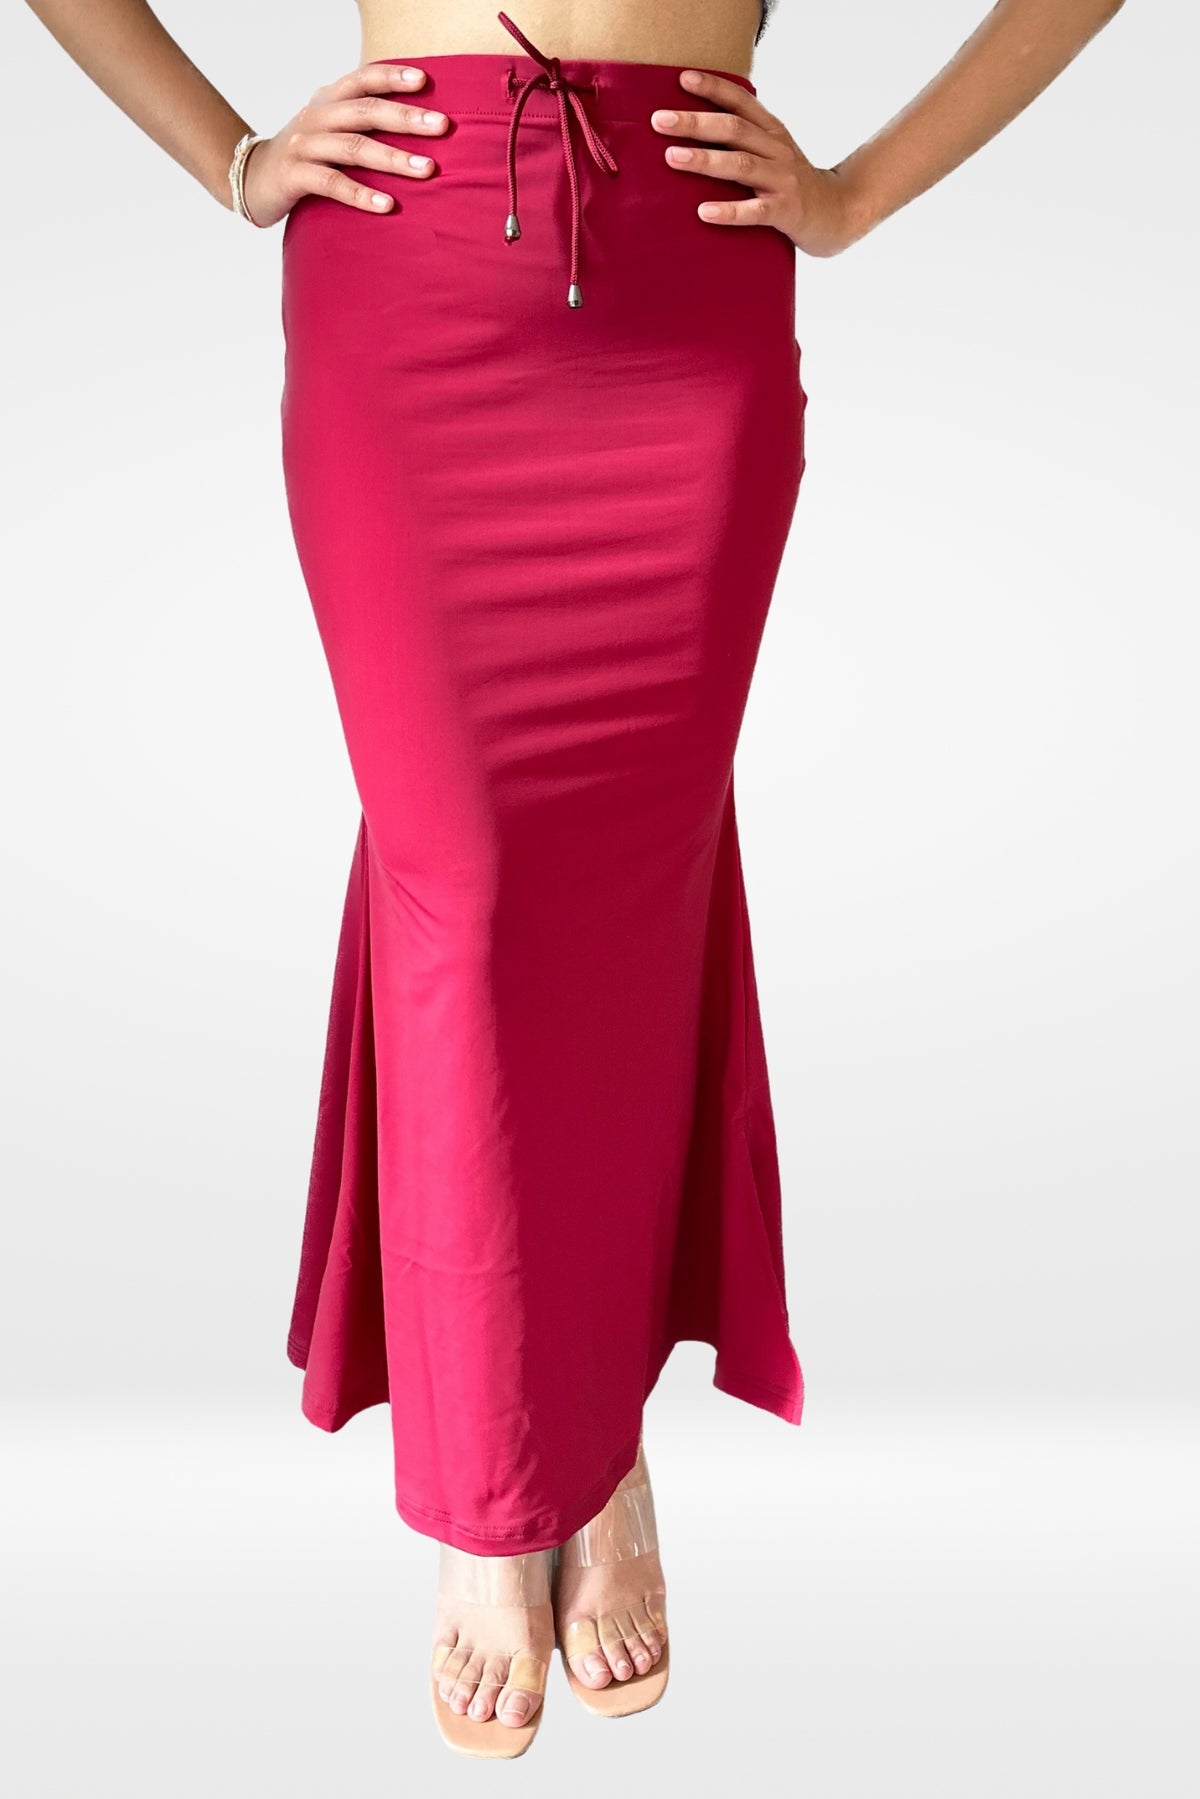 Buy Red Shapewear Saree Petticoat In Cotton Lycra With Elastic Waistband  And Slit